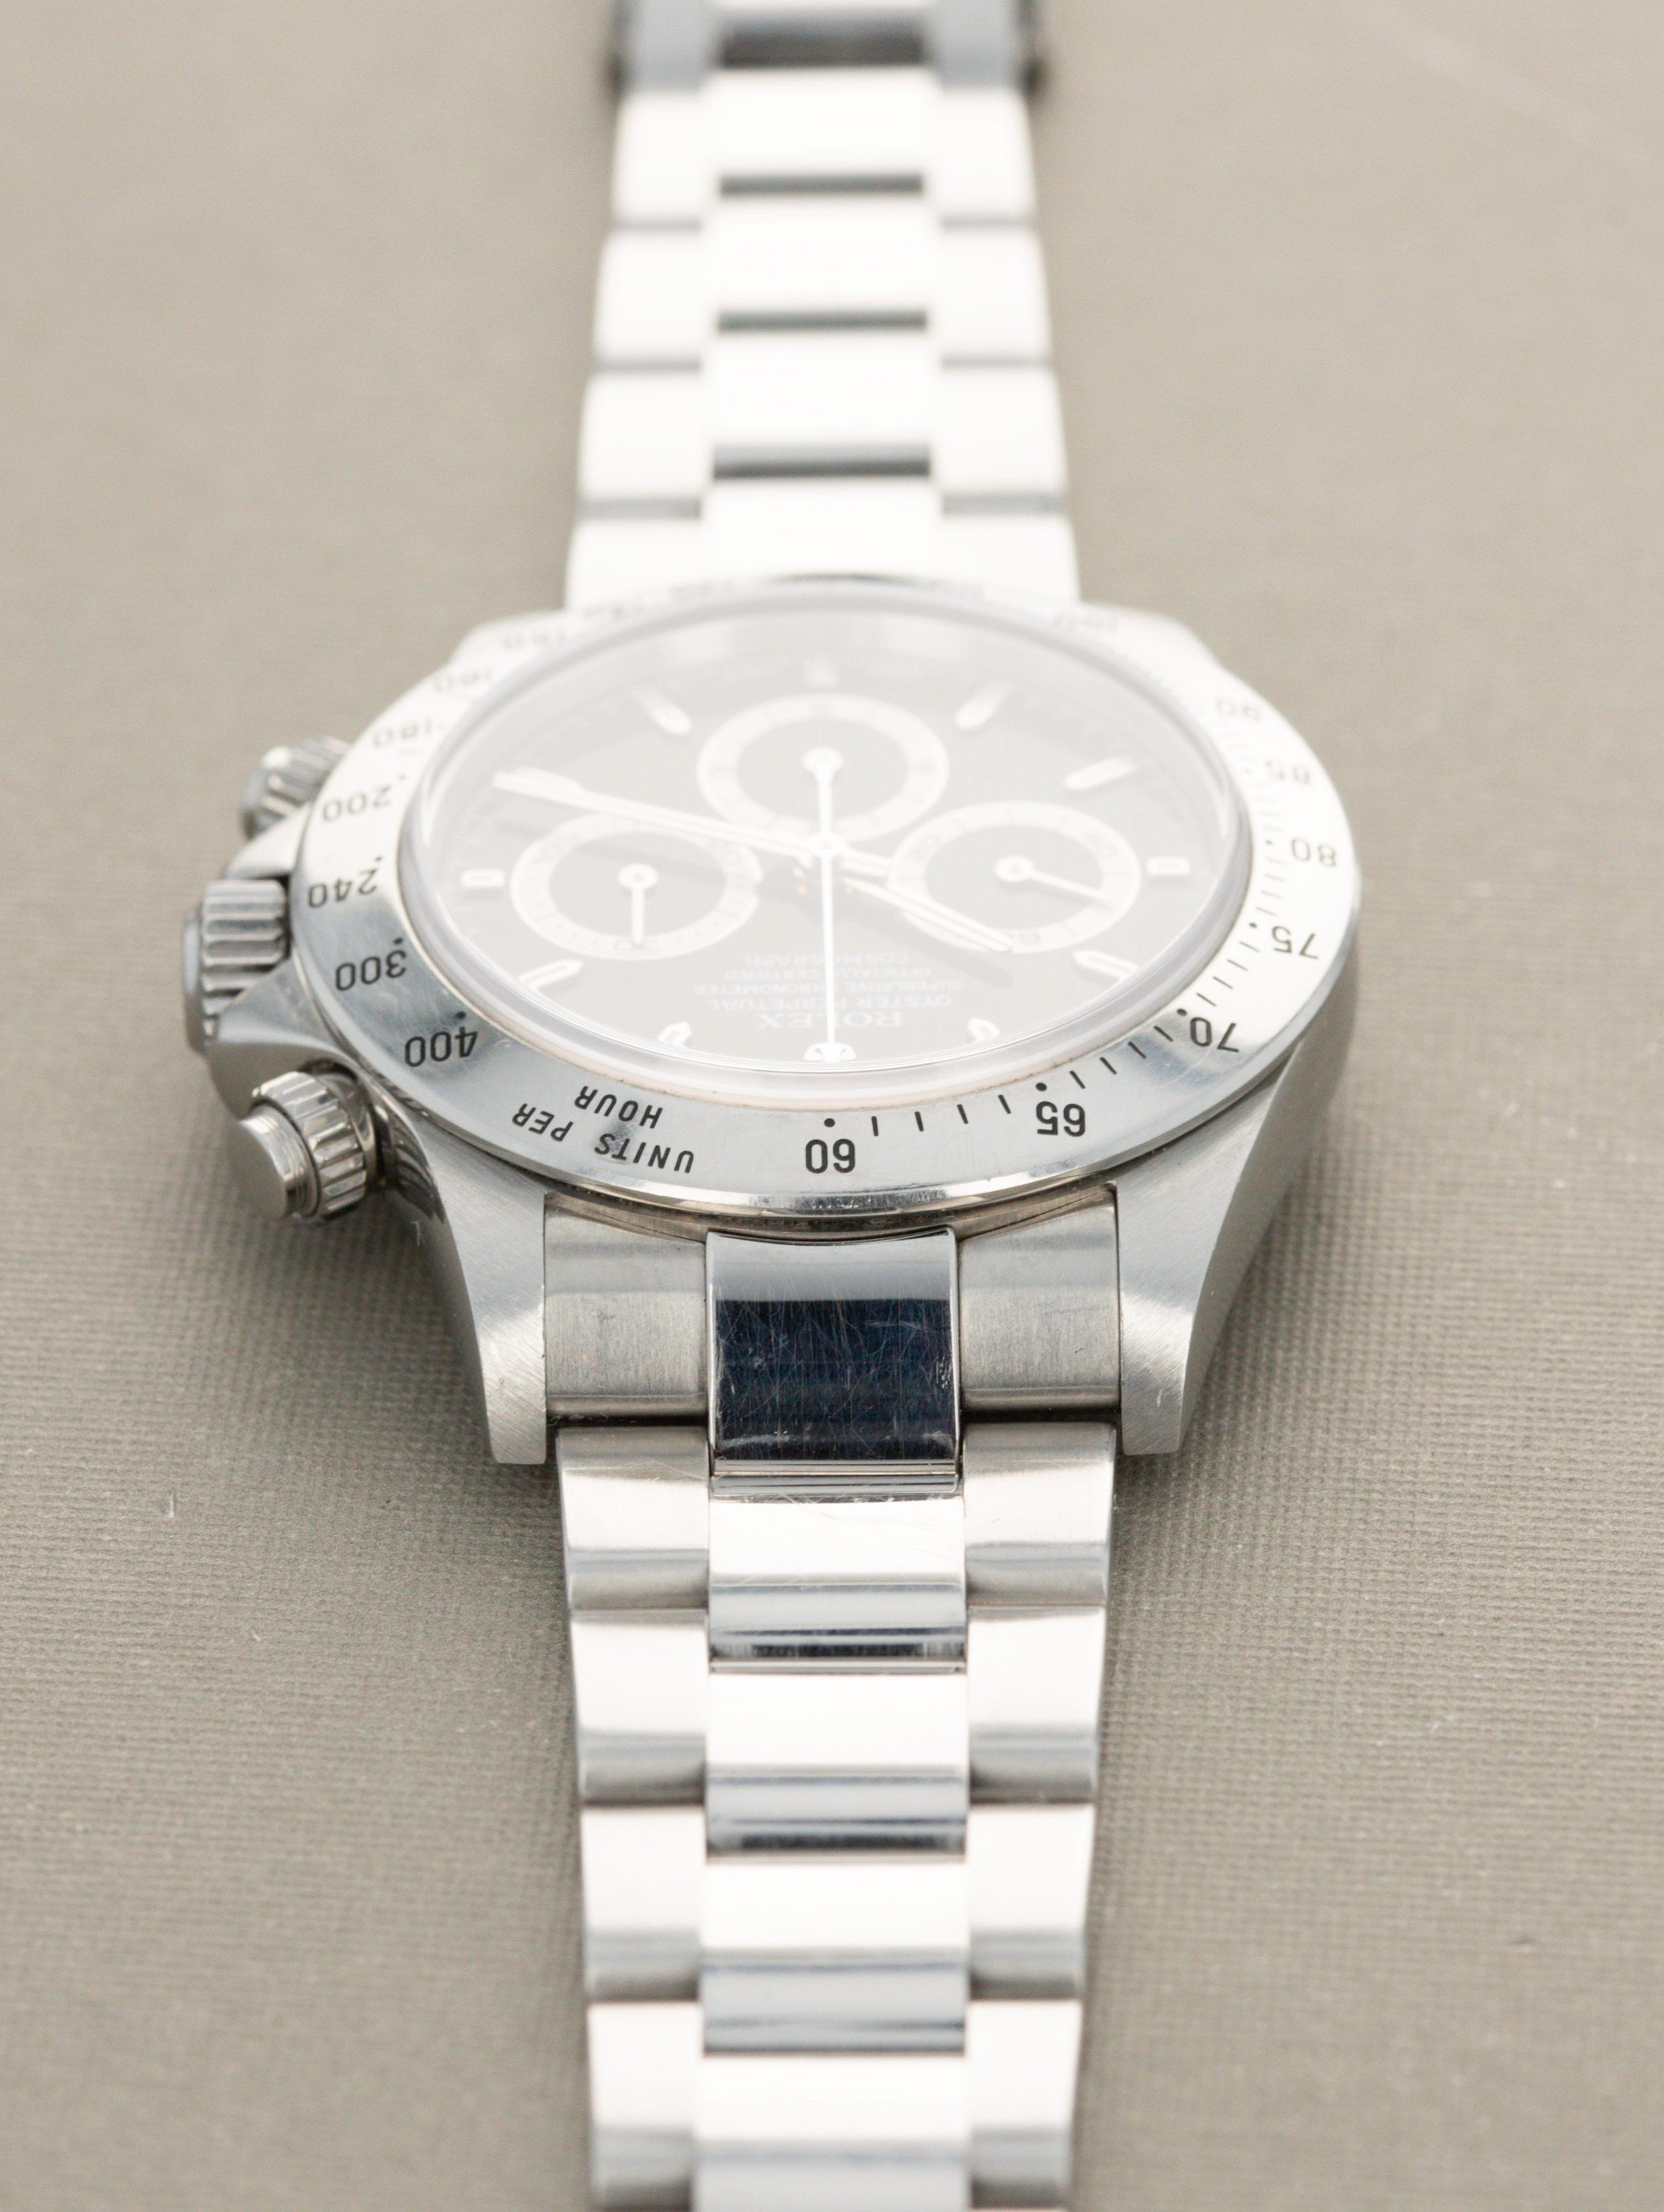 Rolex 'Zenith' Daytona Ref. 16520 - Mint Unpolished, with Boxes & Papers